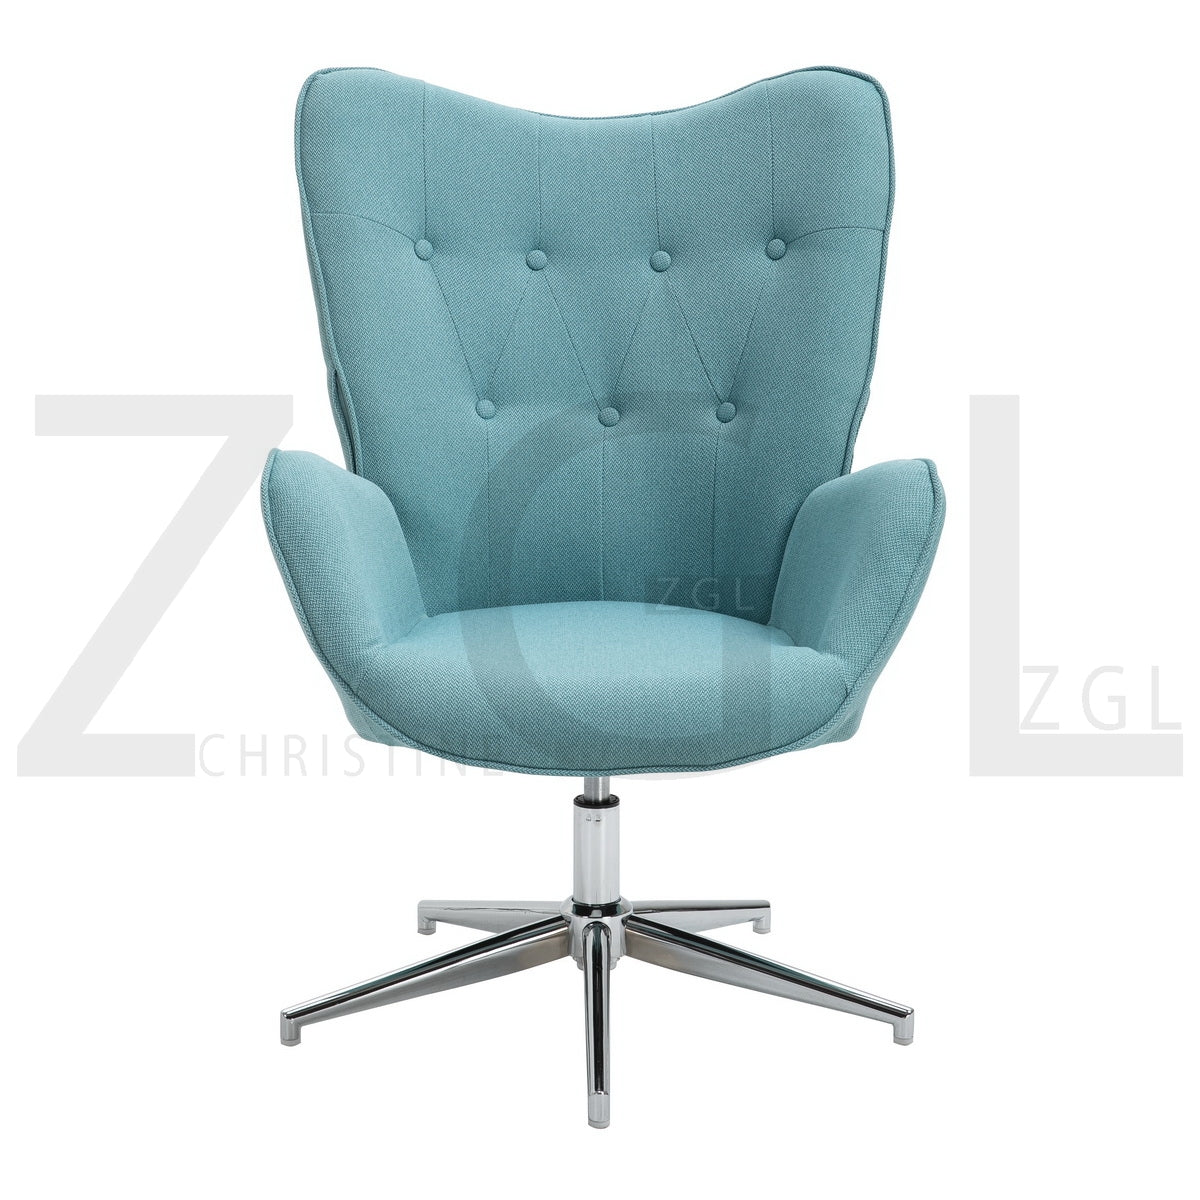 Leisure chair-Light Blue Color Fabric Upholstery, swivel